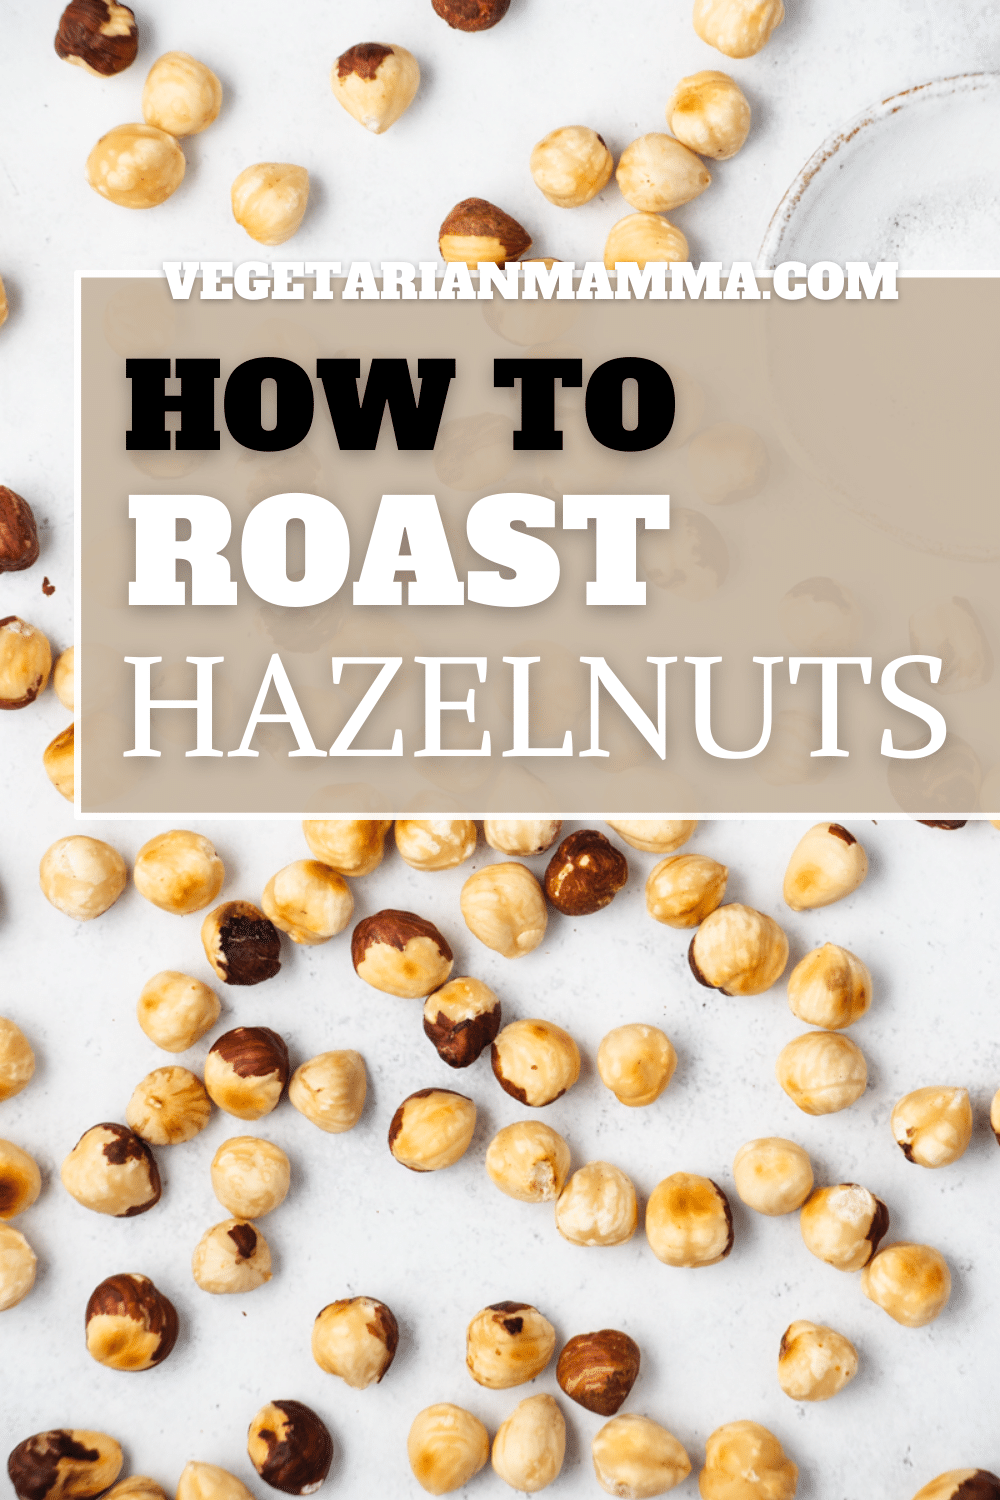 Learn how to roast hazelnuts in just minutes. We offer directions for your oven or a skillet! Read on to learn how to roast hazelnuts! | how to roast hazelnuts | how to roast hazelnuts in the oven | Oven roasted hazelnuts | skillet roasted hazelnuts